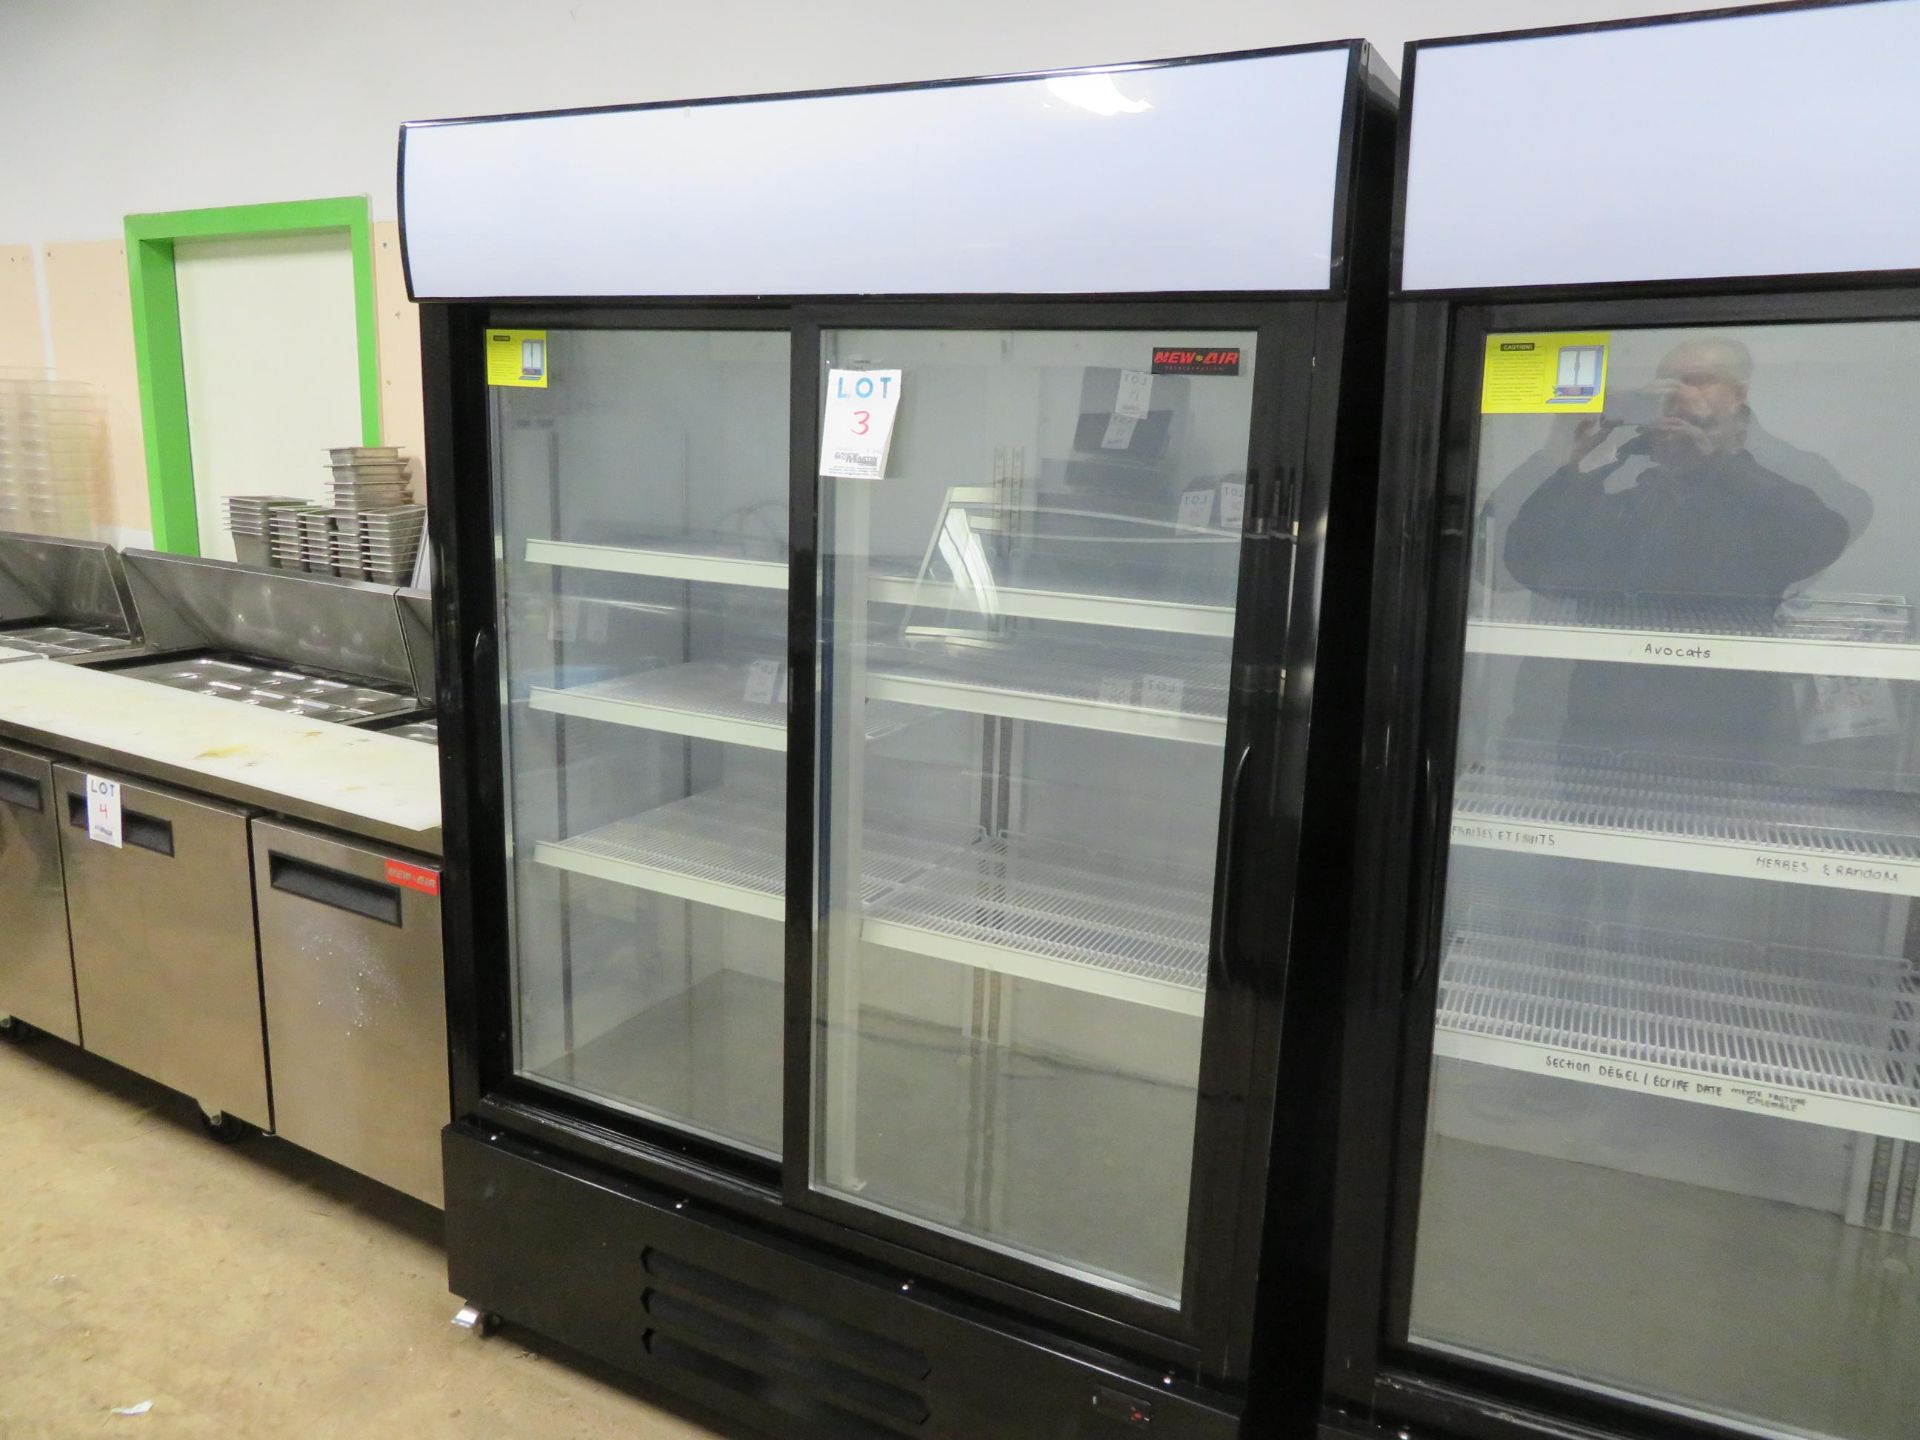 NEW AIR 2 door glass upright refrigerator on wheels, Mod # NGR-115S, approx. 54"w x 29"d x 78"h